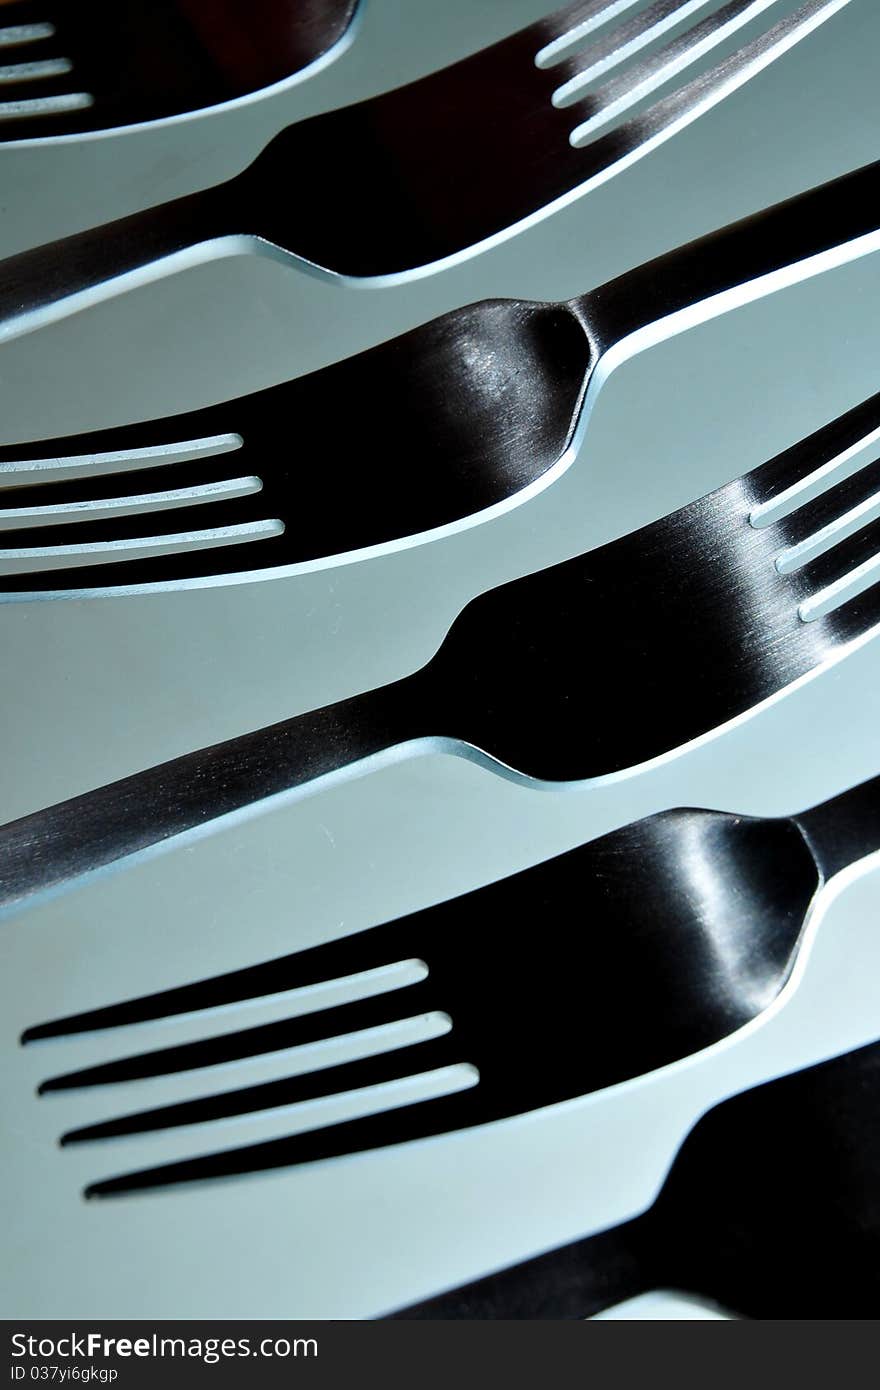 Close-up of six stainless steel eating forks in smooth white light against light blue background.